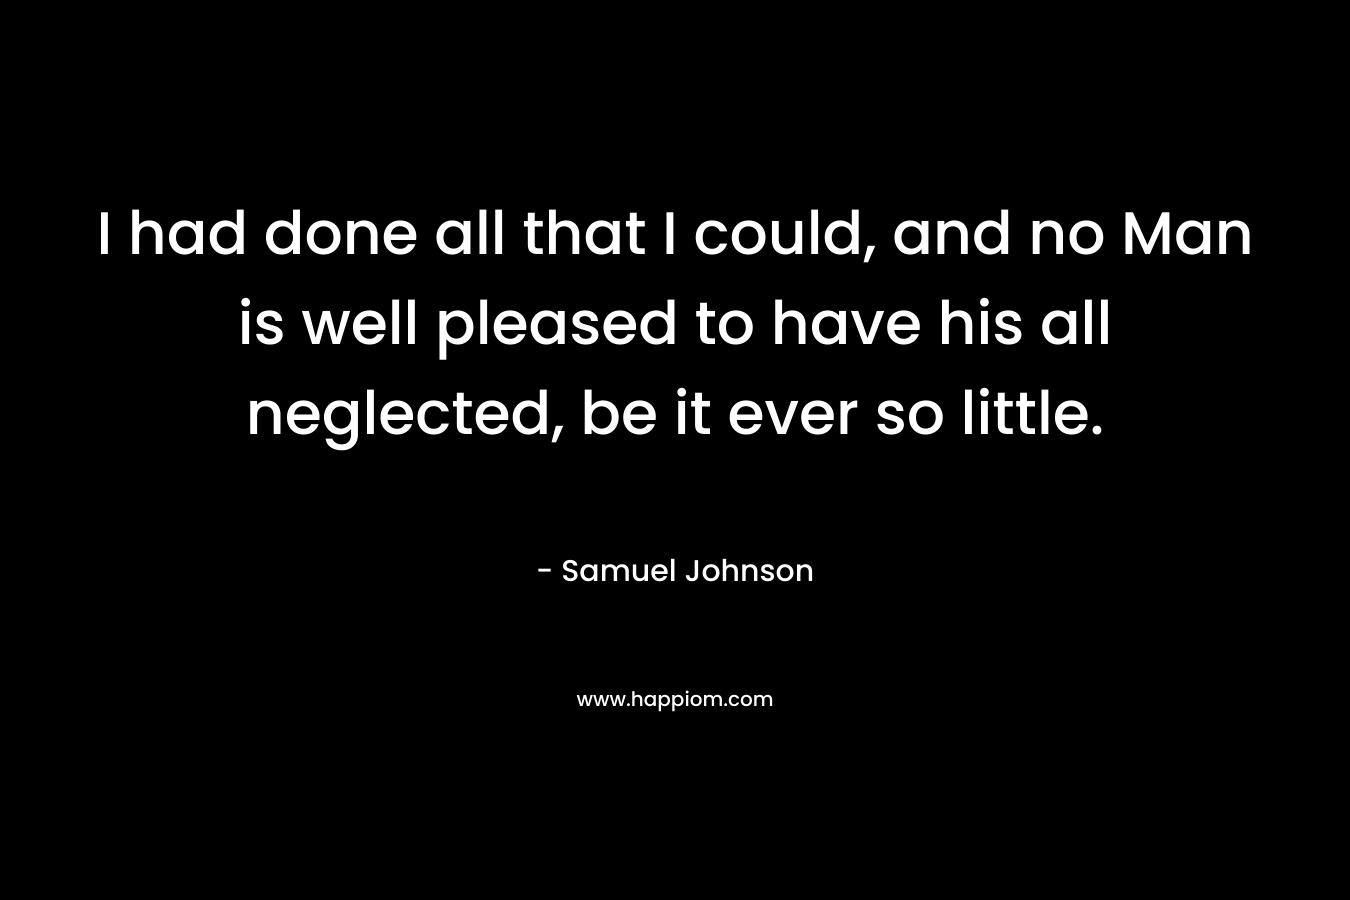 I had done all that I could, and no Man is well pleased to have his all neglected, be it ever so little. – Samuel Johnson